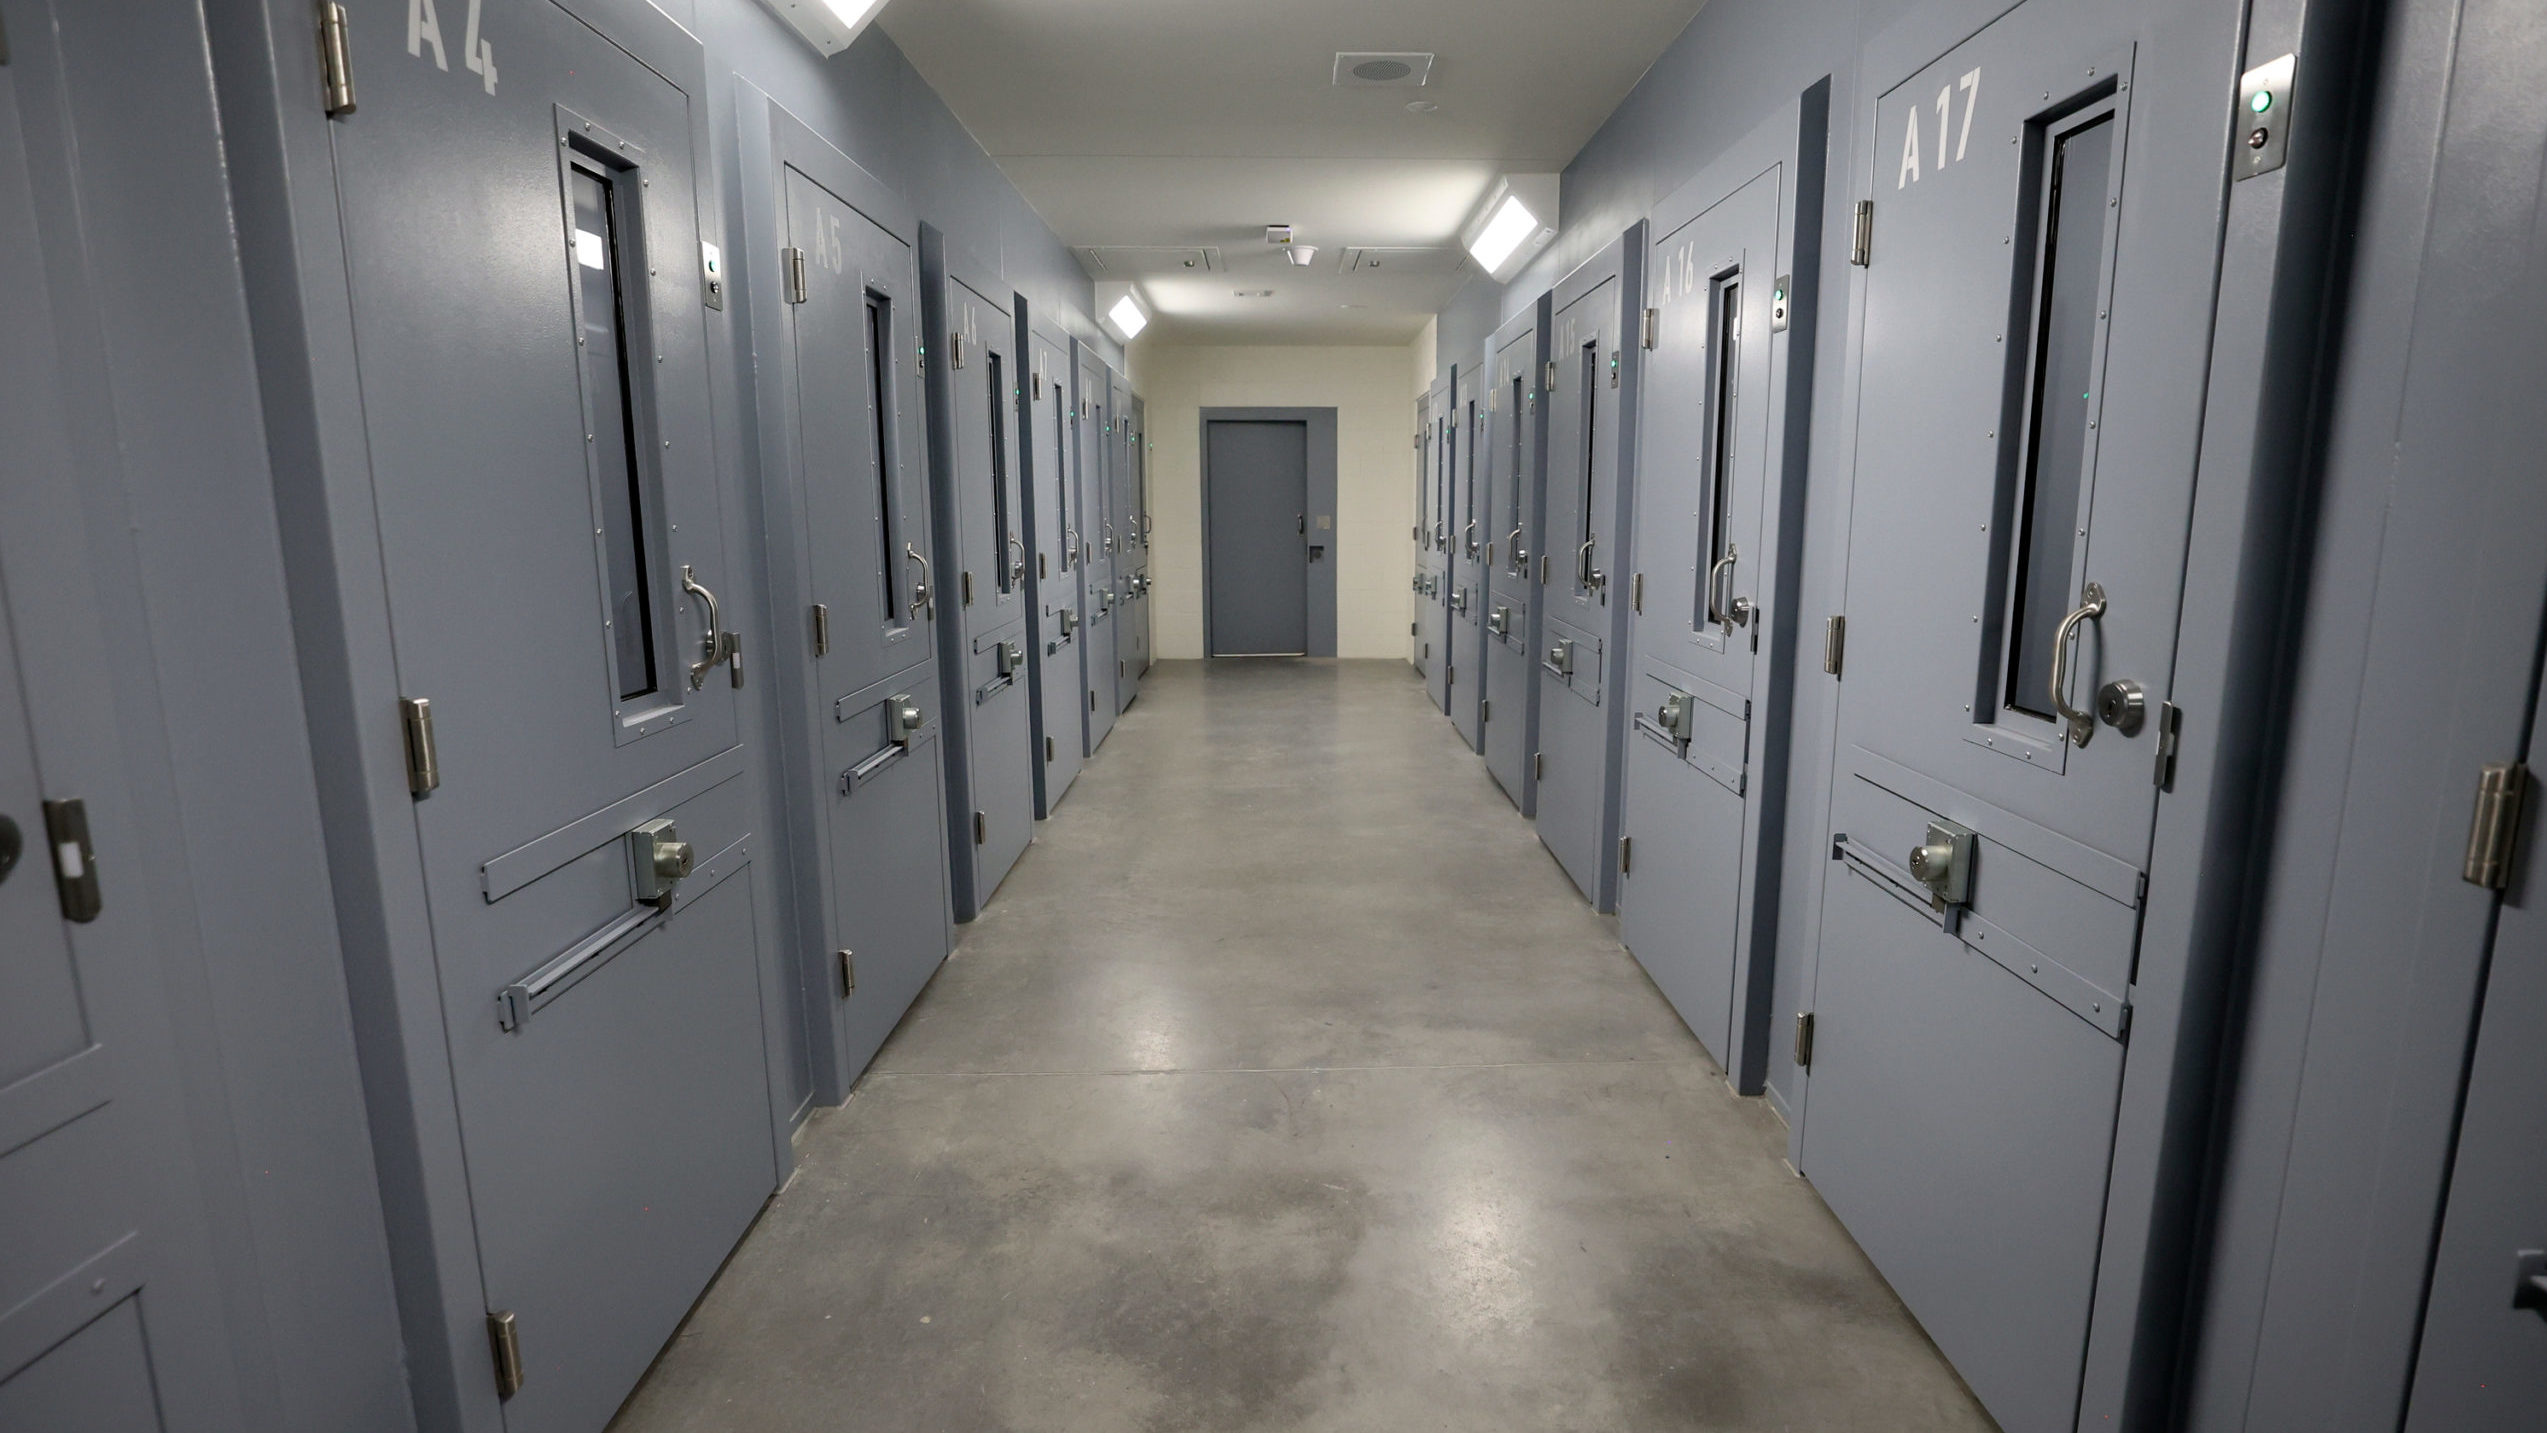 The Utah Department of Corrections has provided more details after three separate assaults on priso...